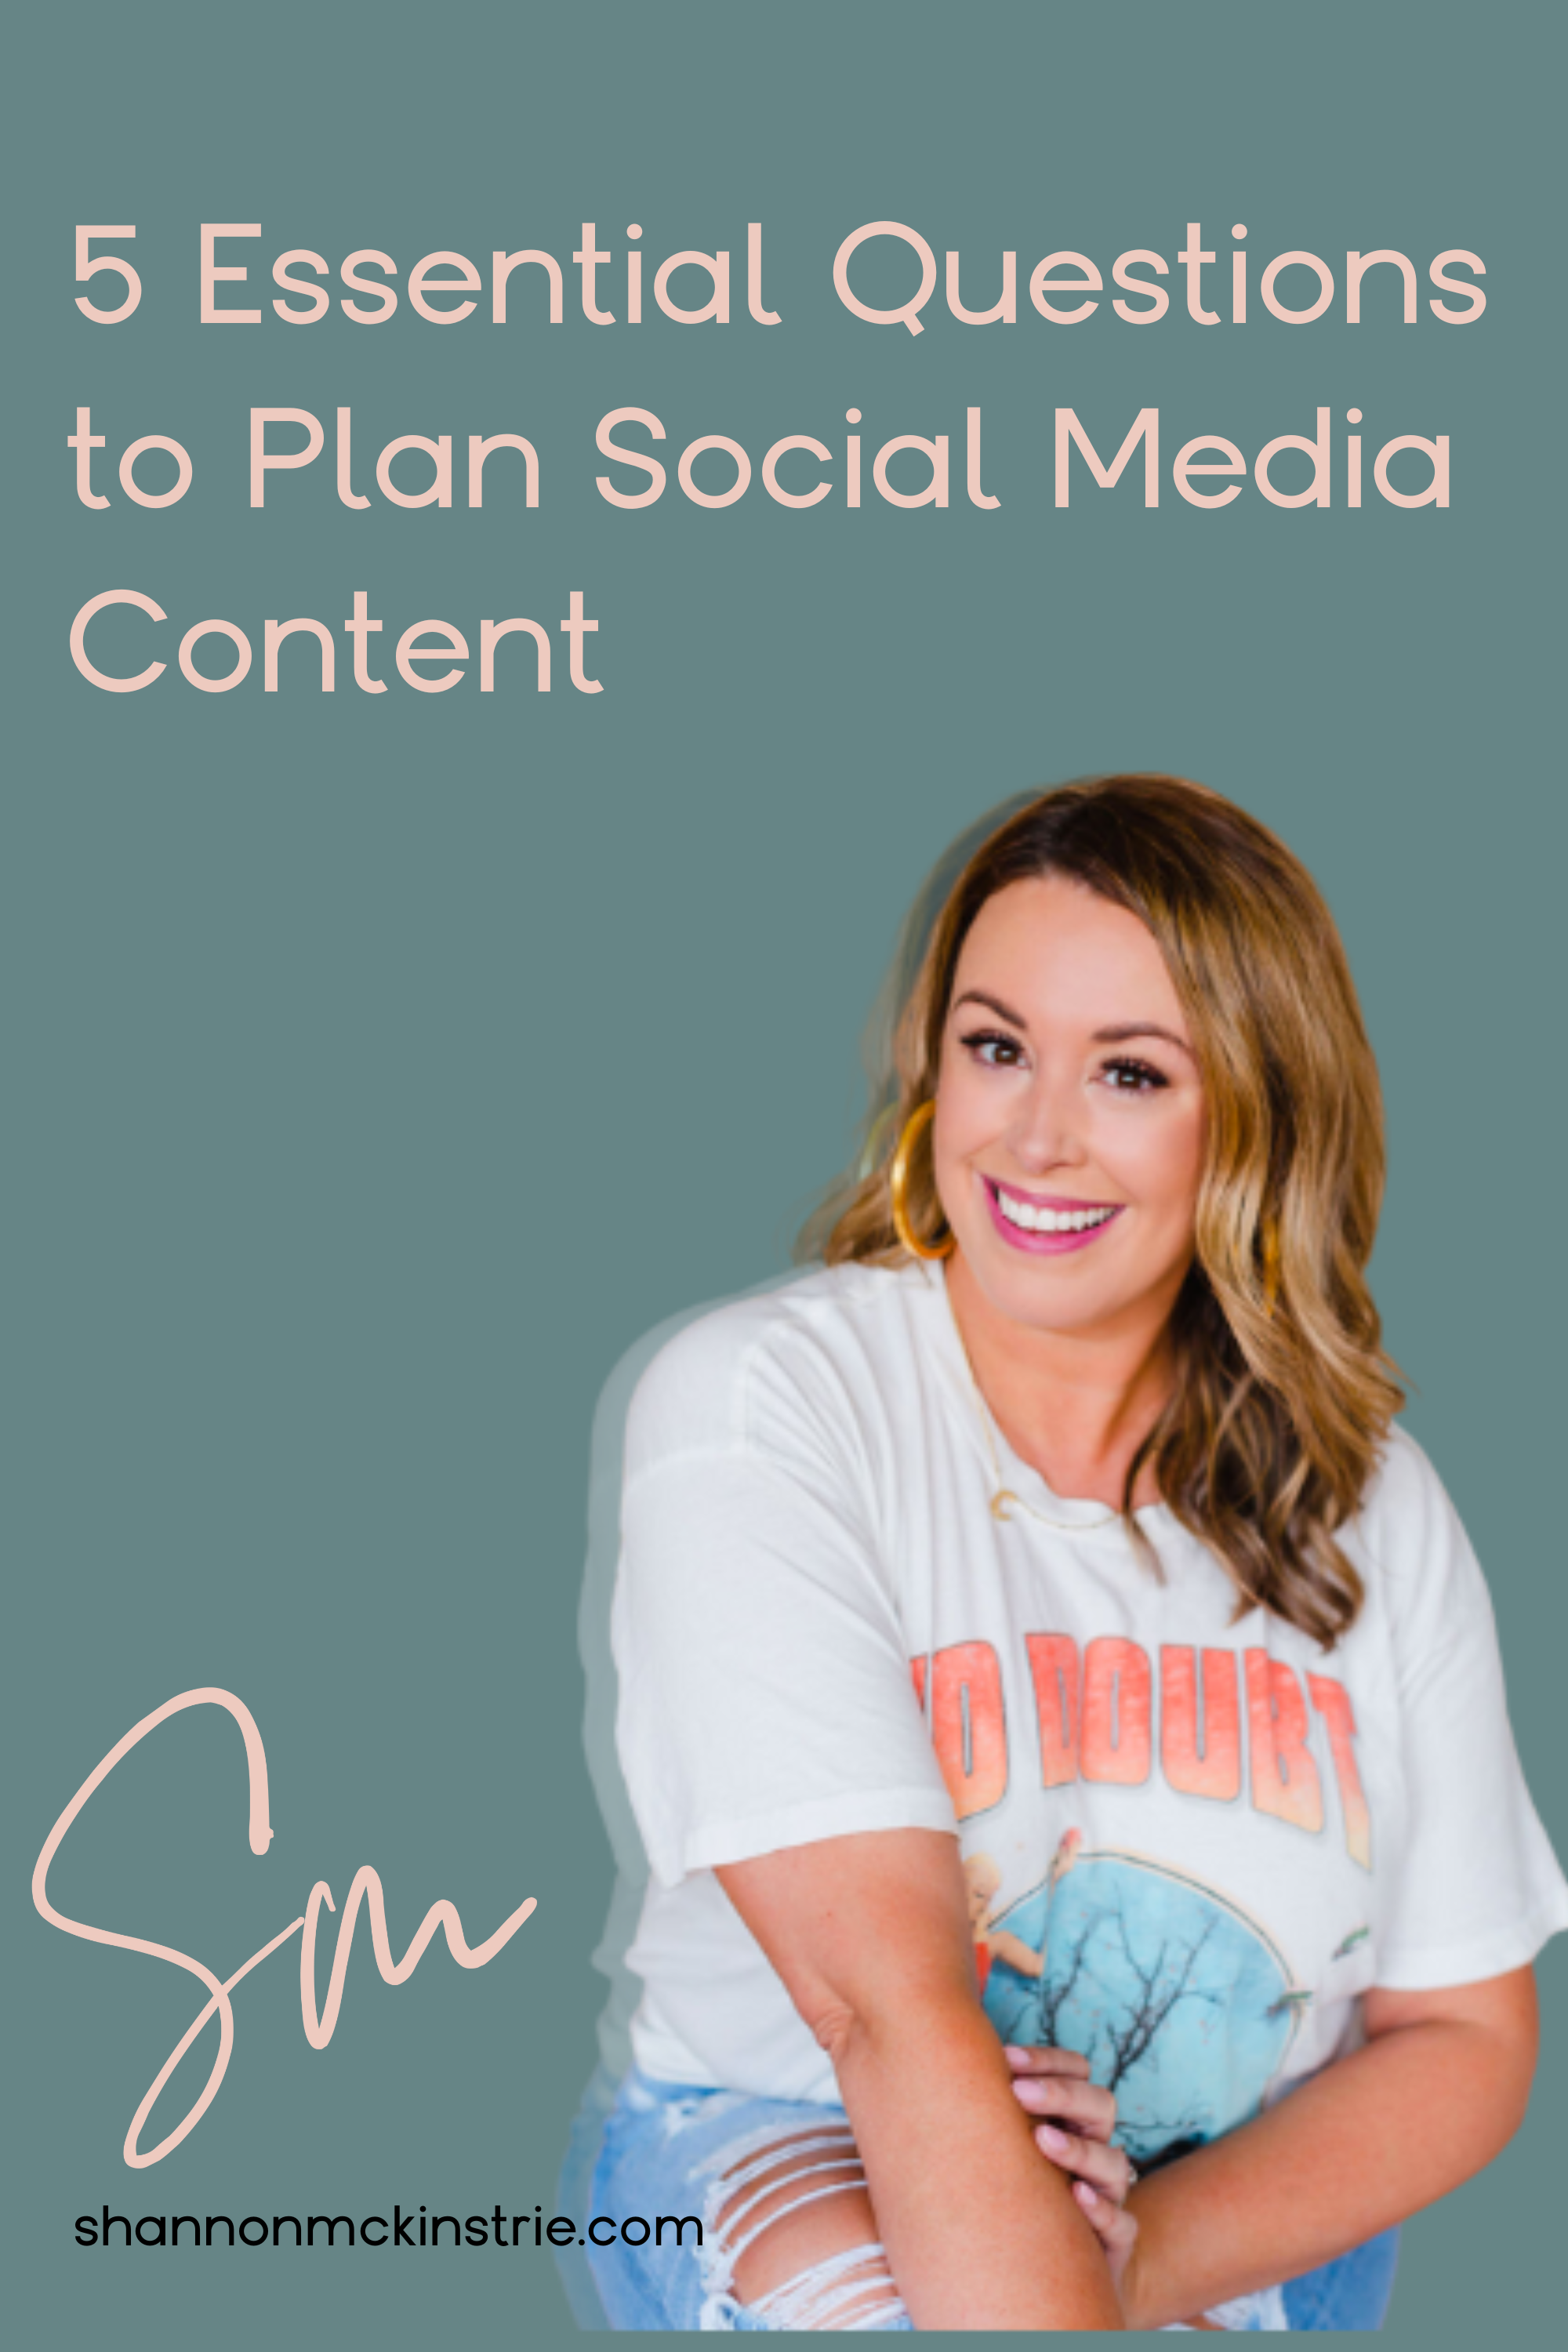 A photo of Shannon McKinstrie in a white, No Doubt t-shirt. On the image is text that reads, "5 Essential Questions to Plan Social Media Content."